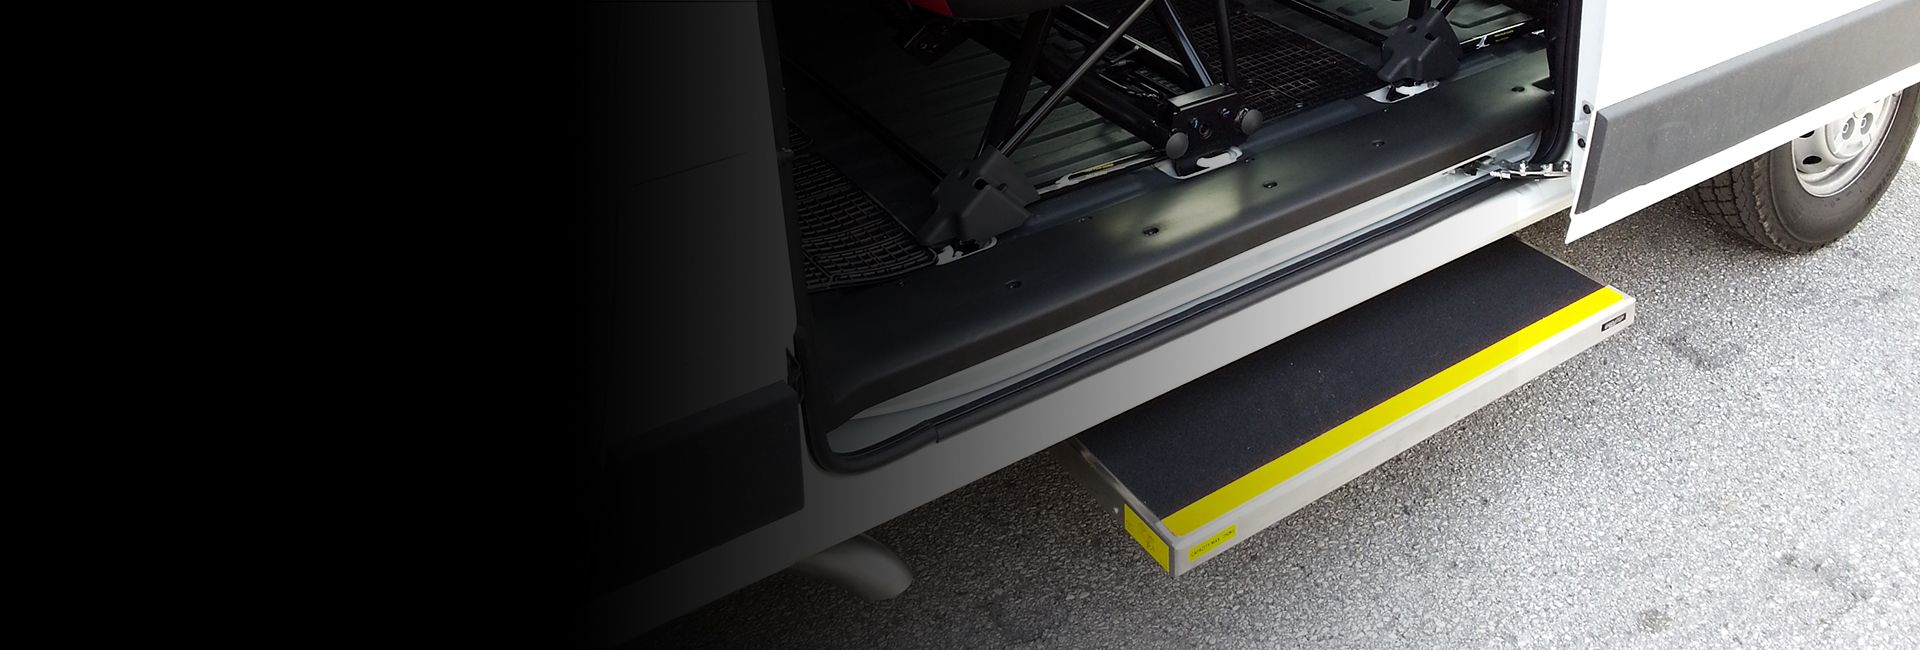 steps and access ramps for vehicule - STEPCONCEPT